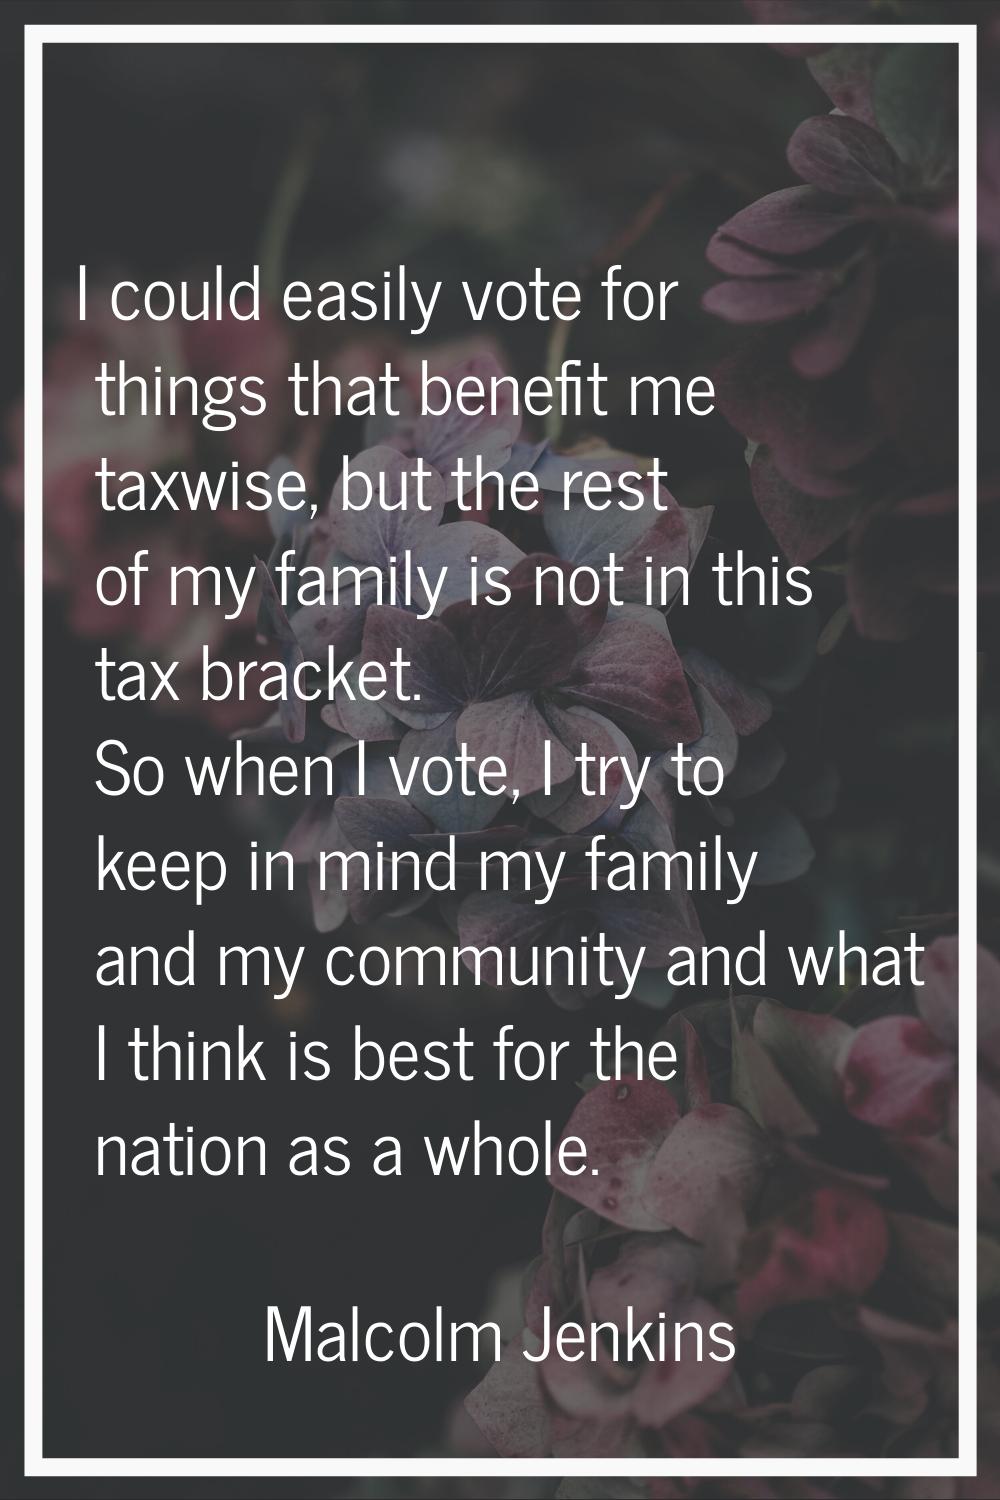 I could easily vote for things that benefit me taxwise, but the rest of my family is not in this ta